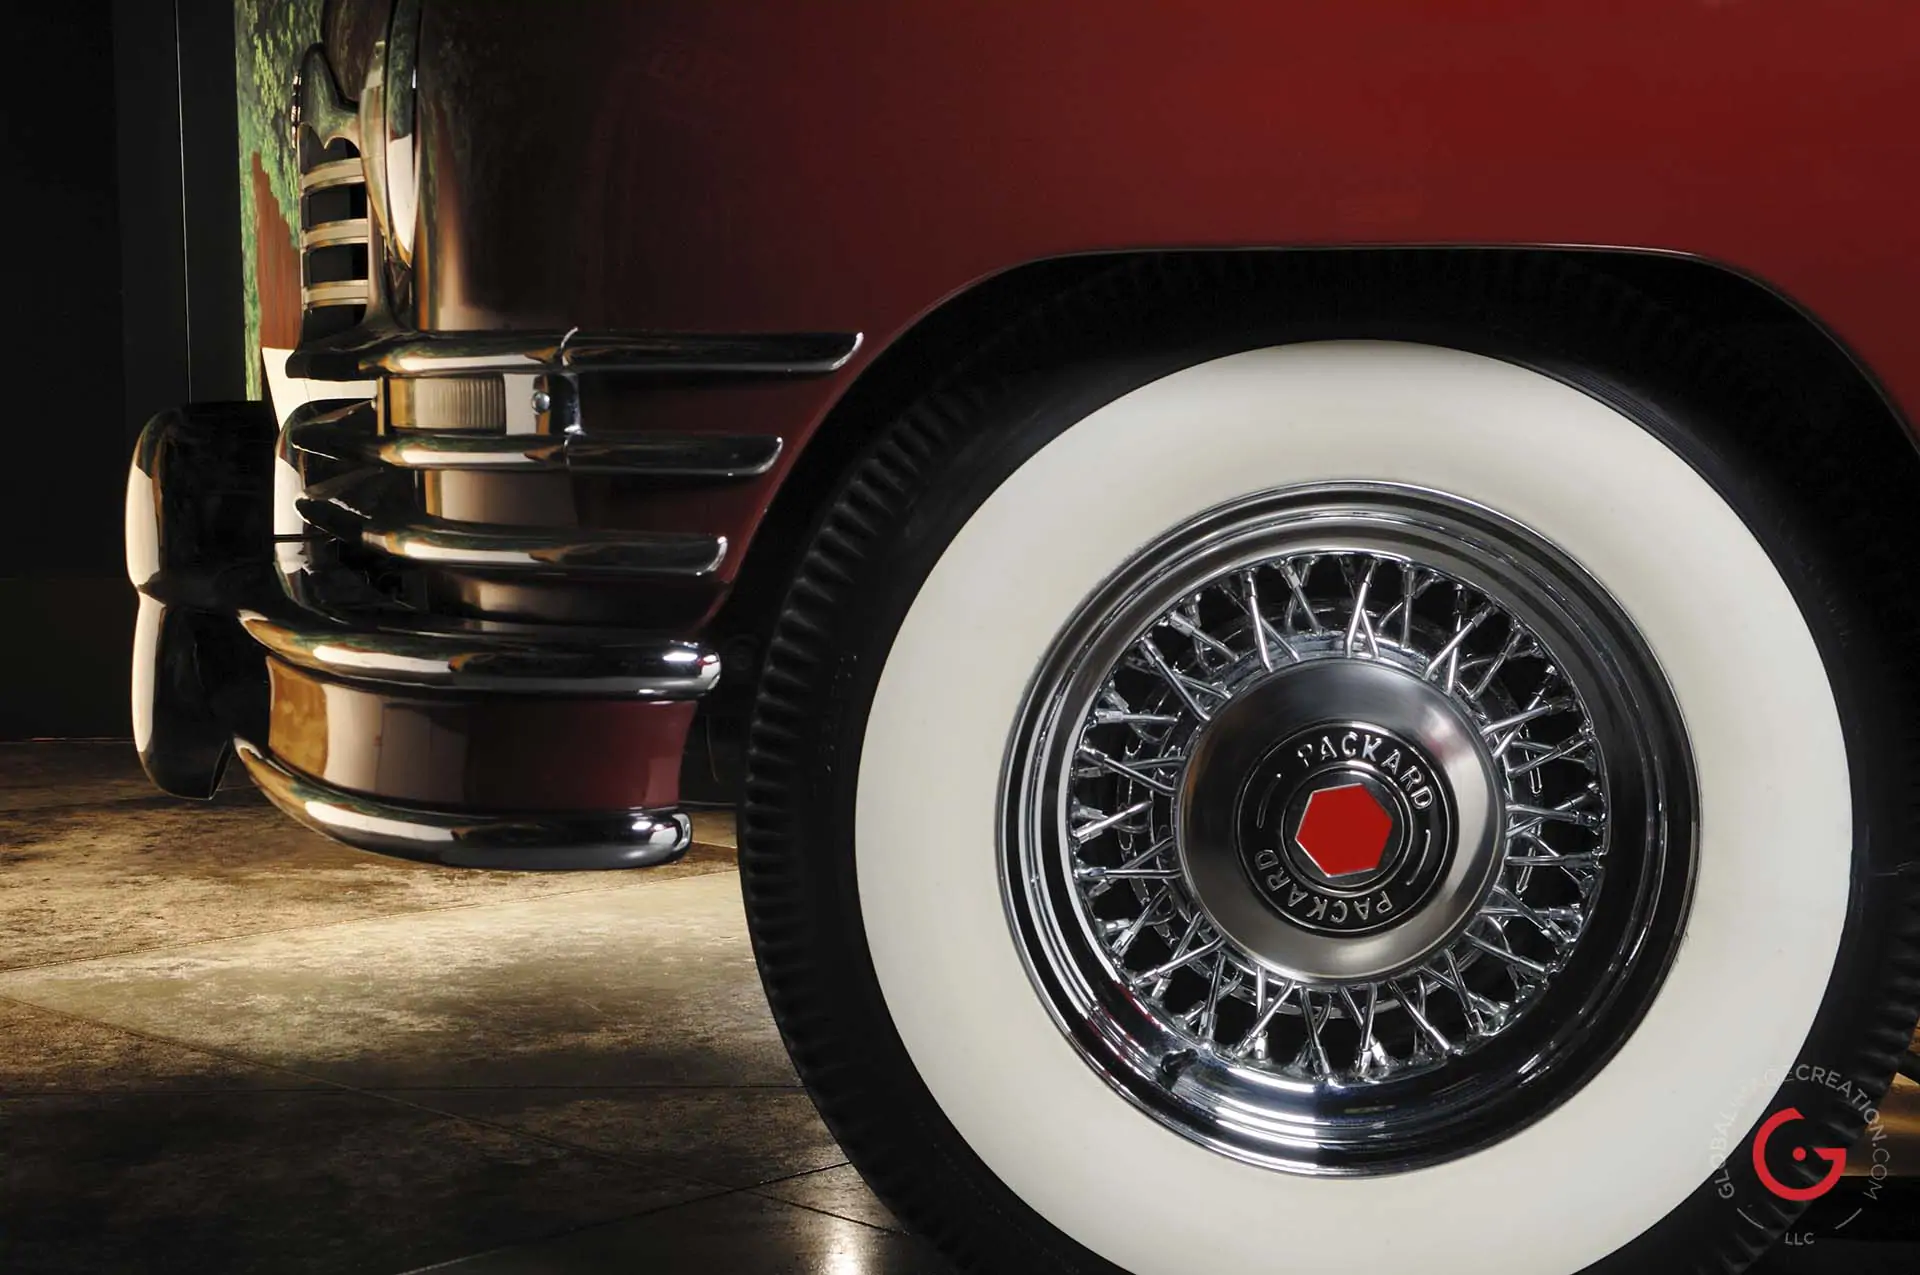 Packard Wheel Detail - Classic Cars Professional Car Photographer, Automotive Photography